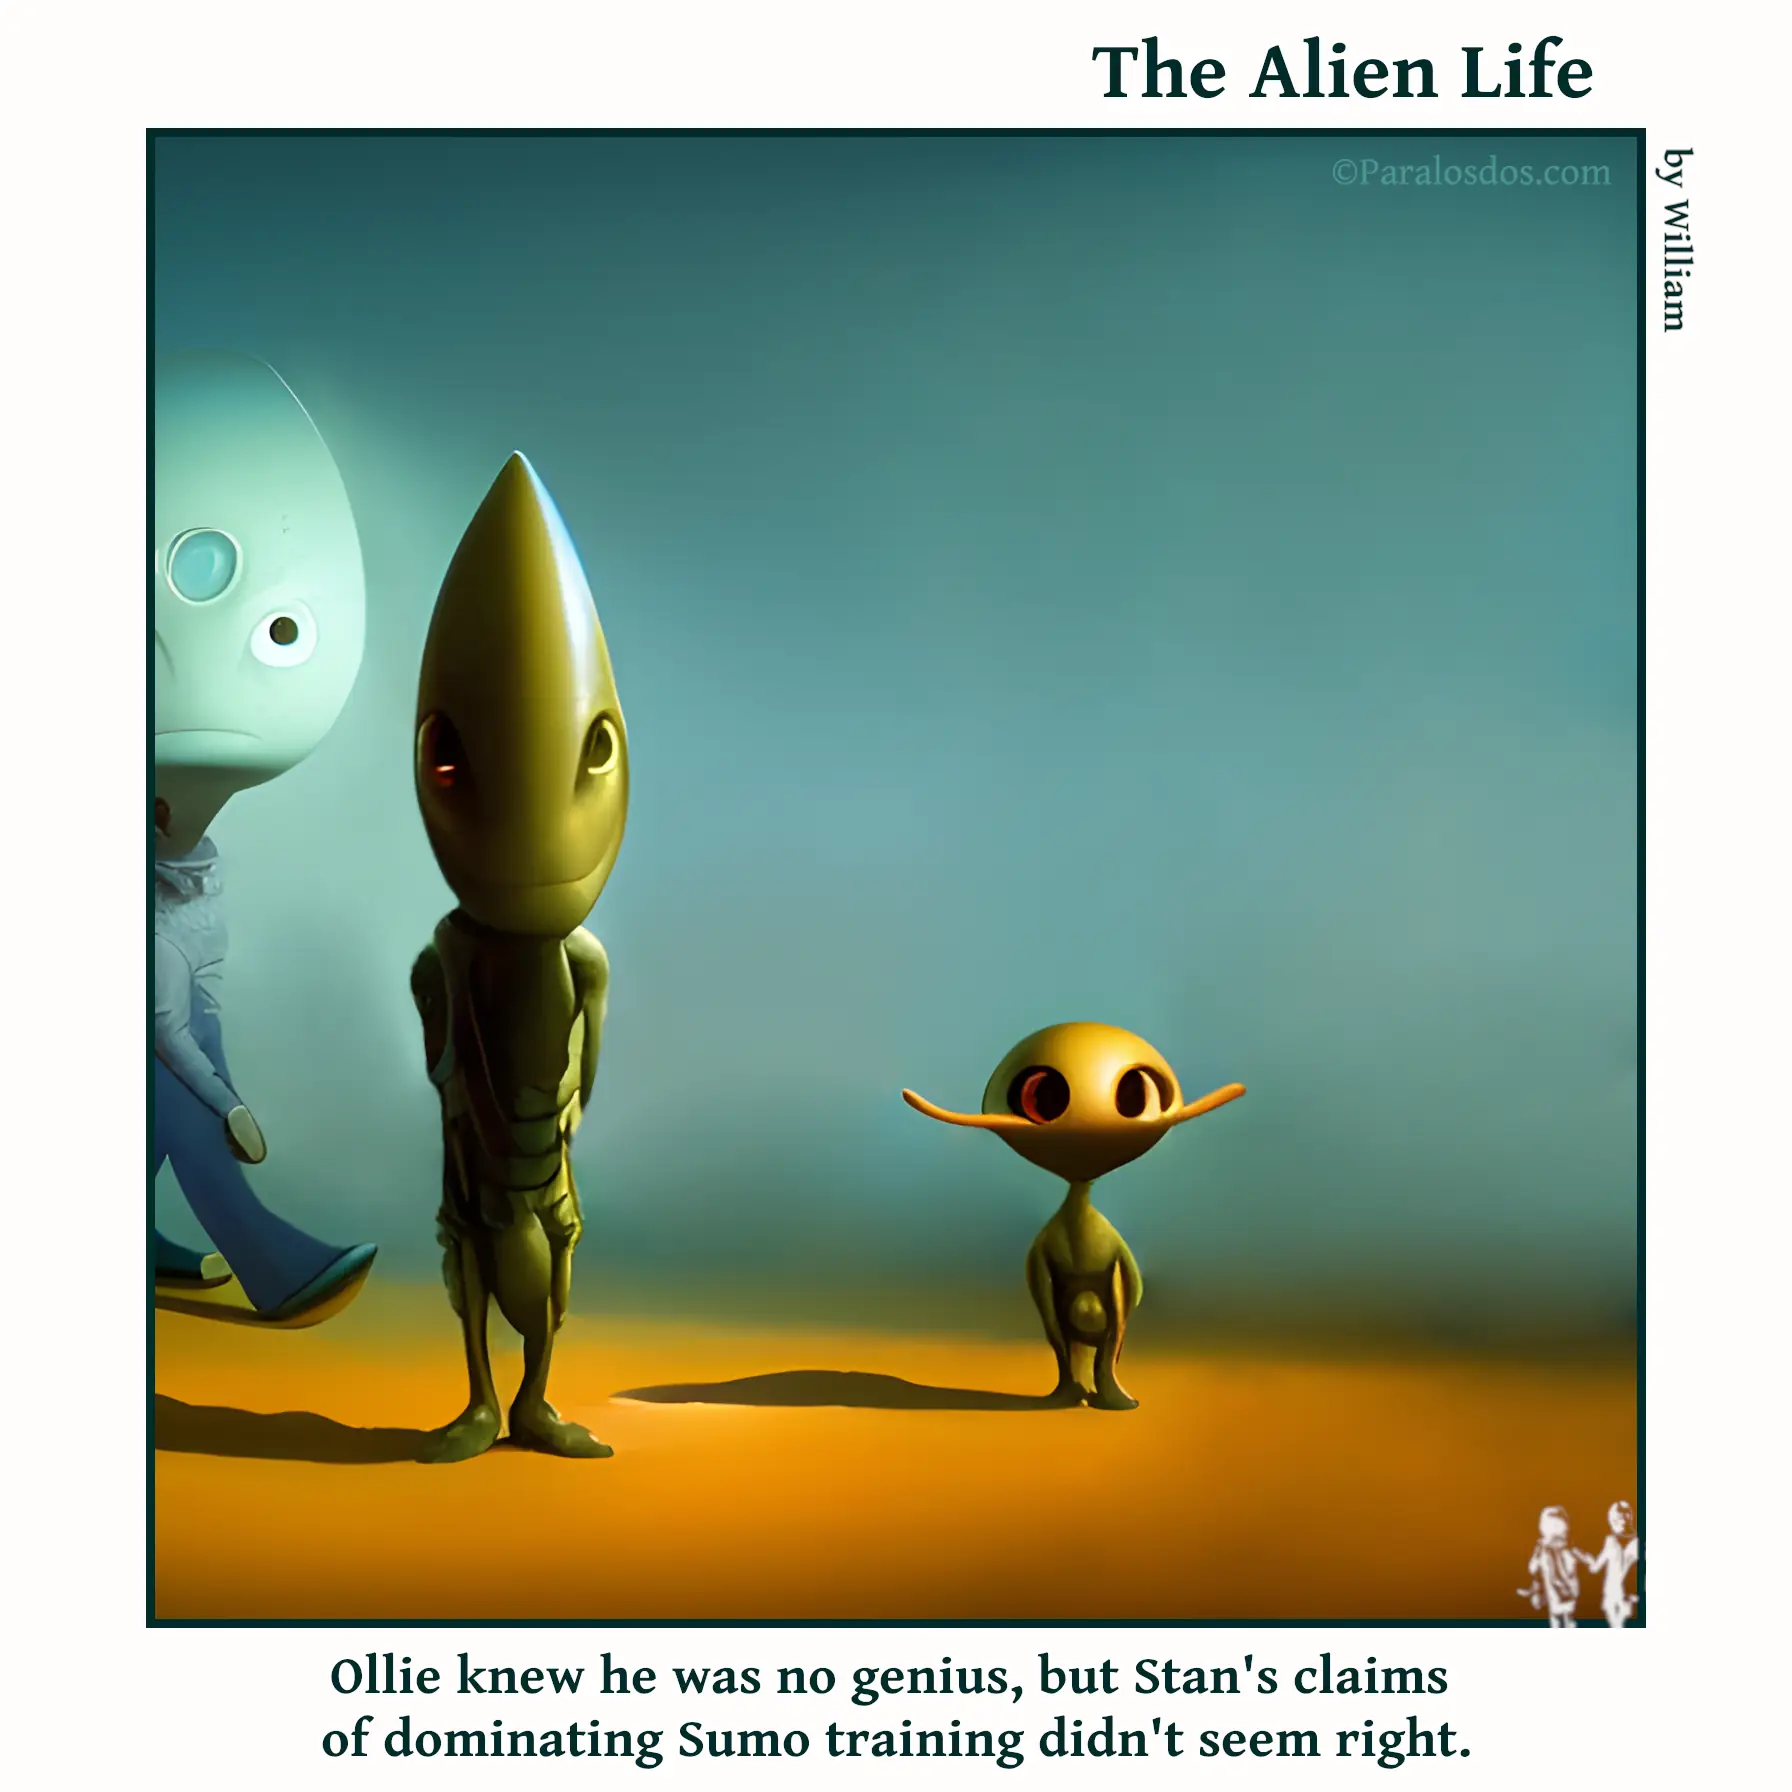 The Alien Life, one panel Comic. Two aliens are standing beside each other. One is tall and skinny and the other is short. The tall one looks proud of himself and the short one looks surprised. The caption reads: Ollie knew he was no genius, but Stan's claims of dominating Sumo training didn't seem right.